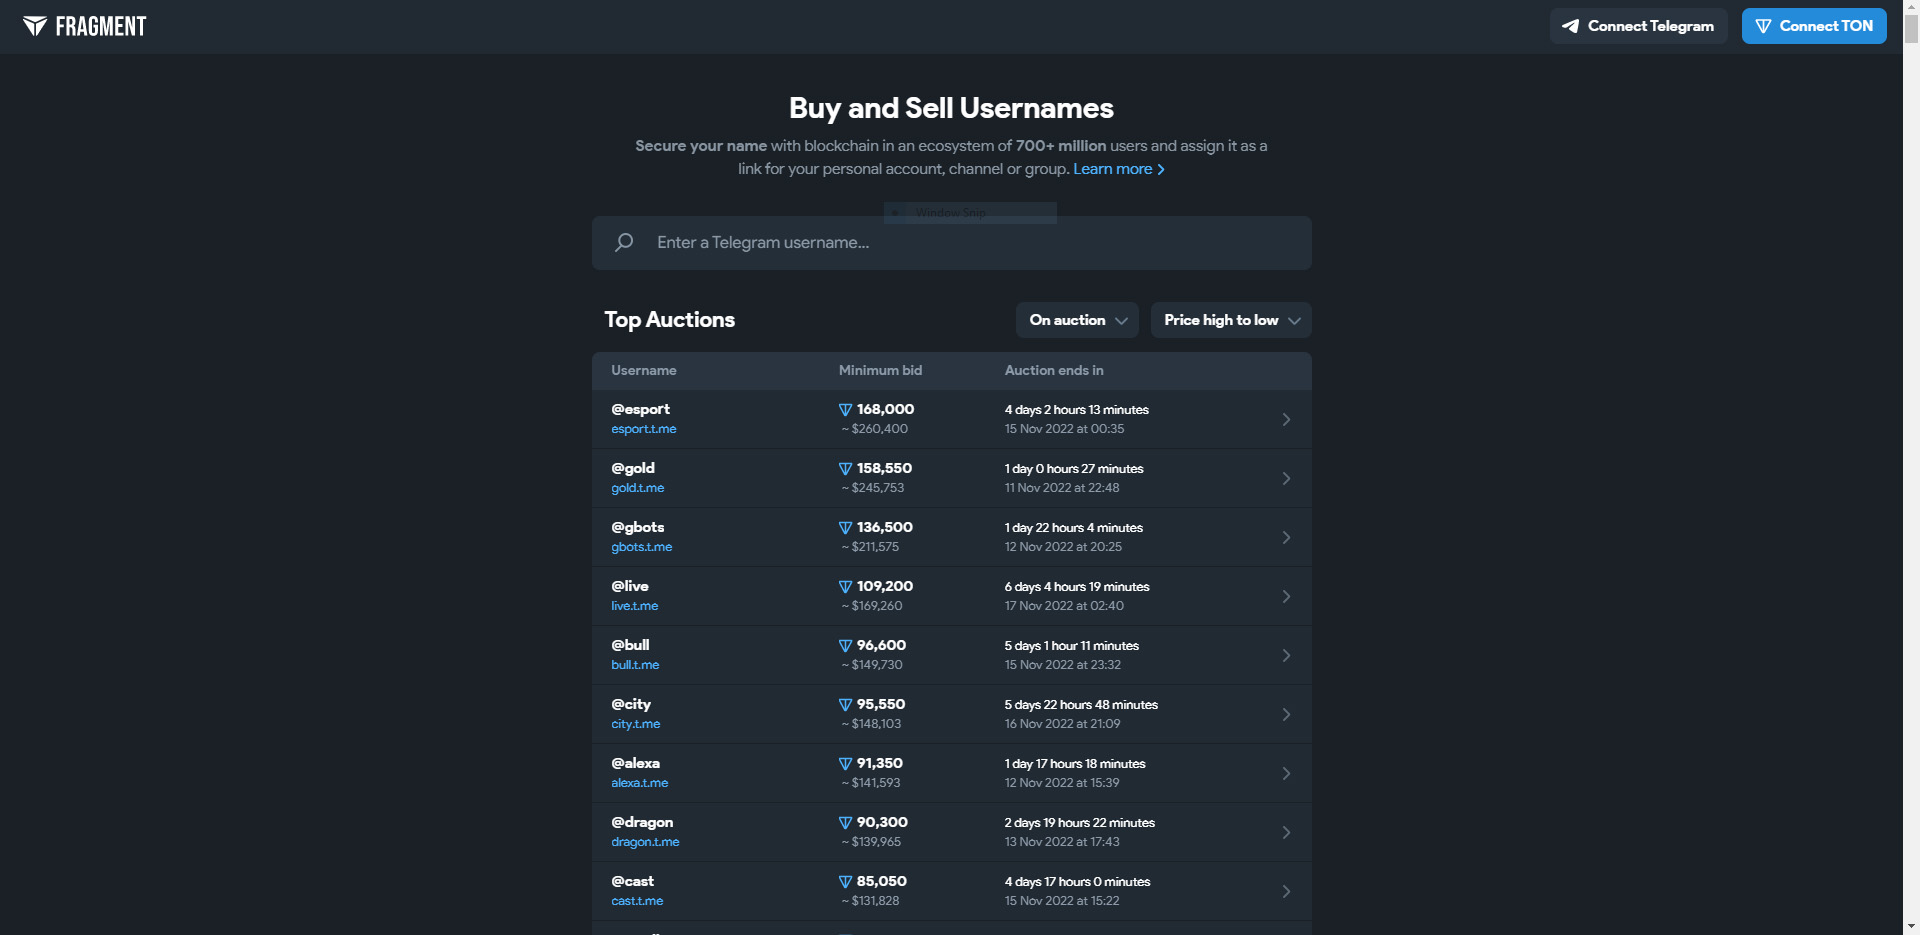 The main page of the Fragment platform for selling Telegram usernames